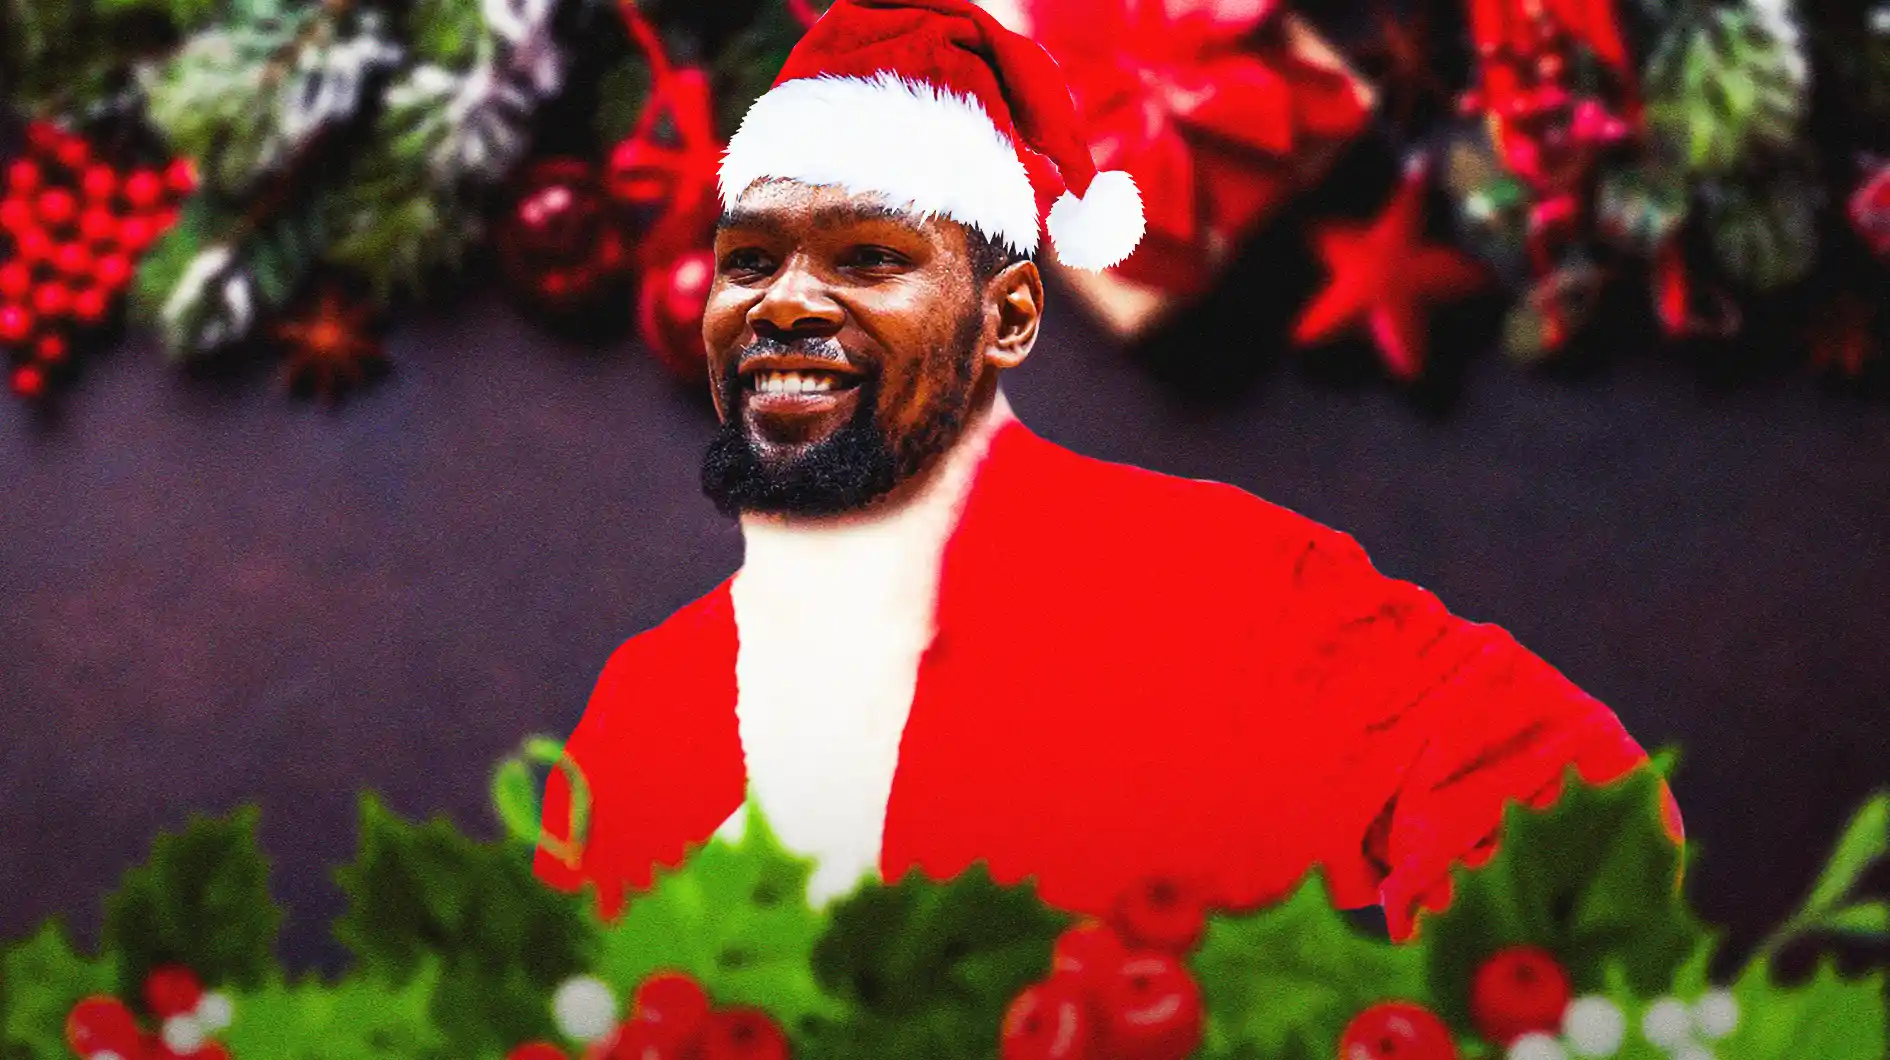 Kevin Durant in a Santa suit